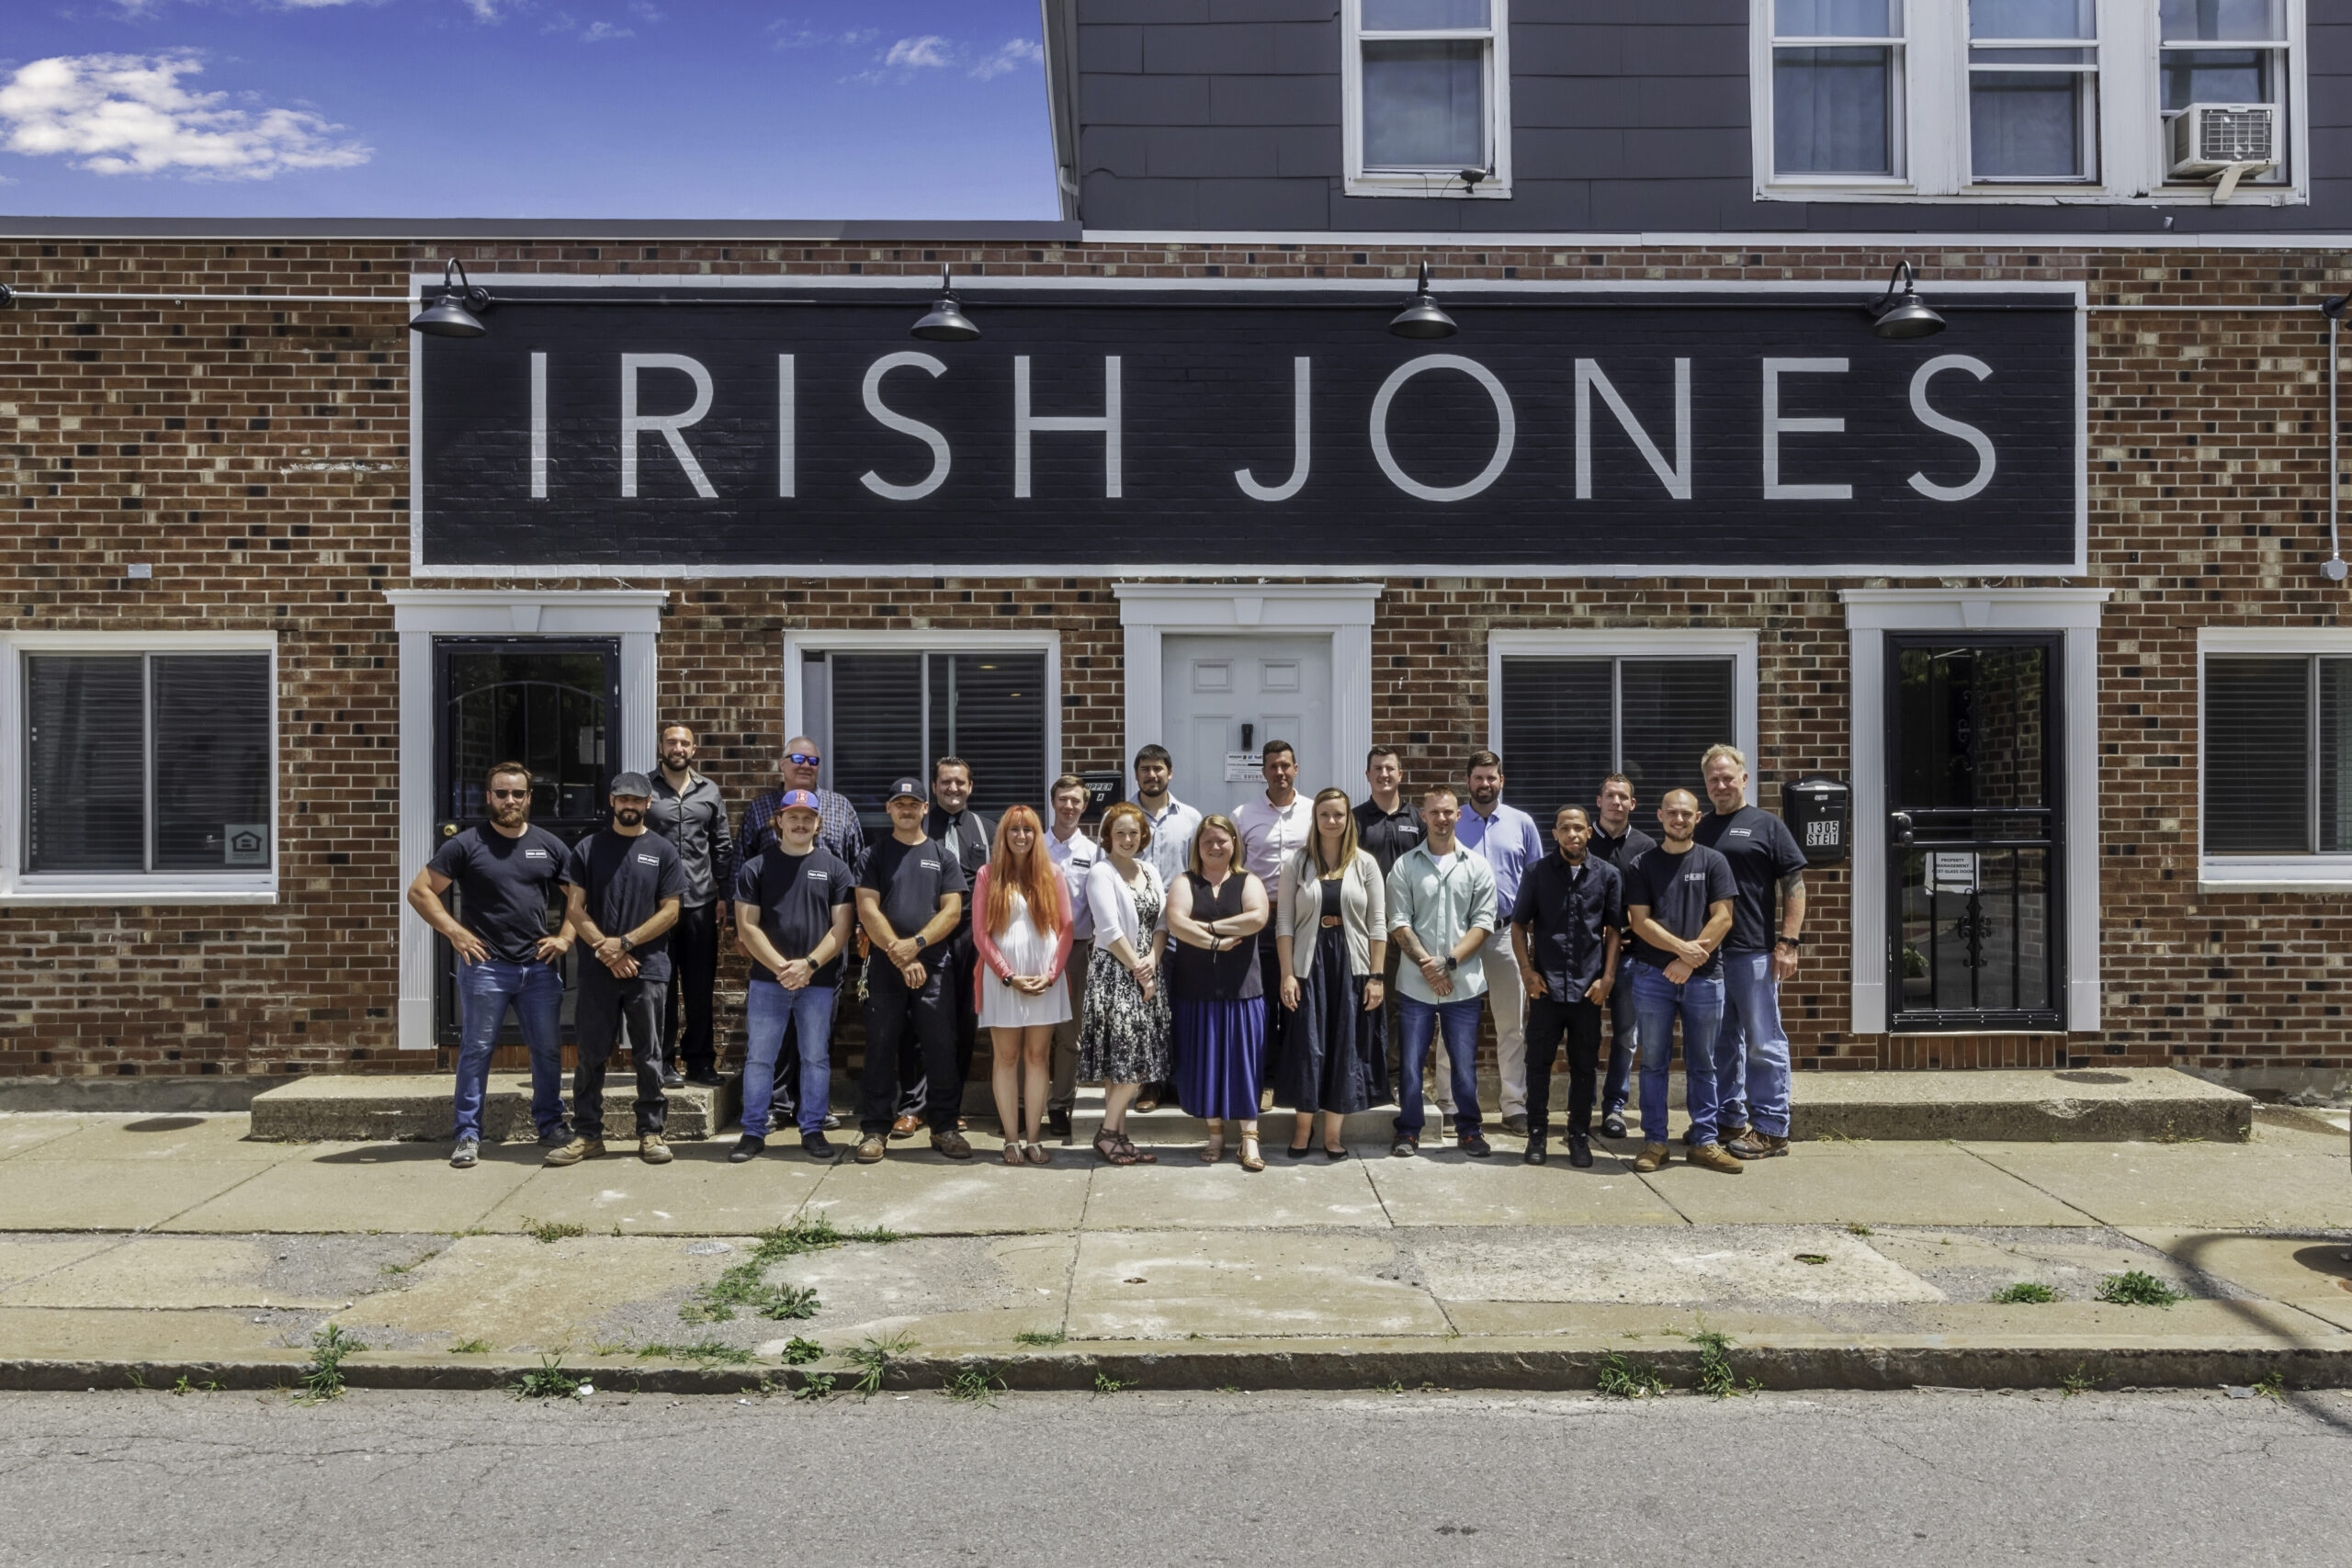 Doino and the Irish Jones team in front of their office building.